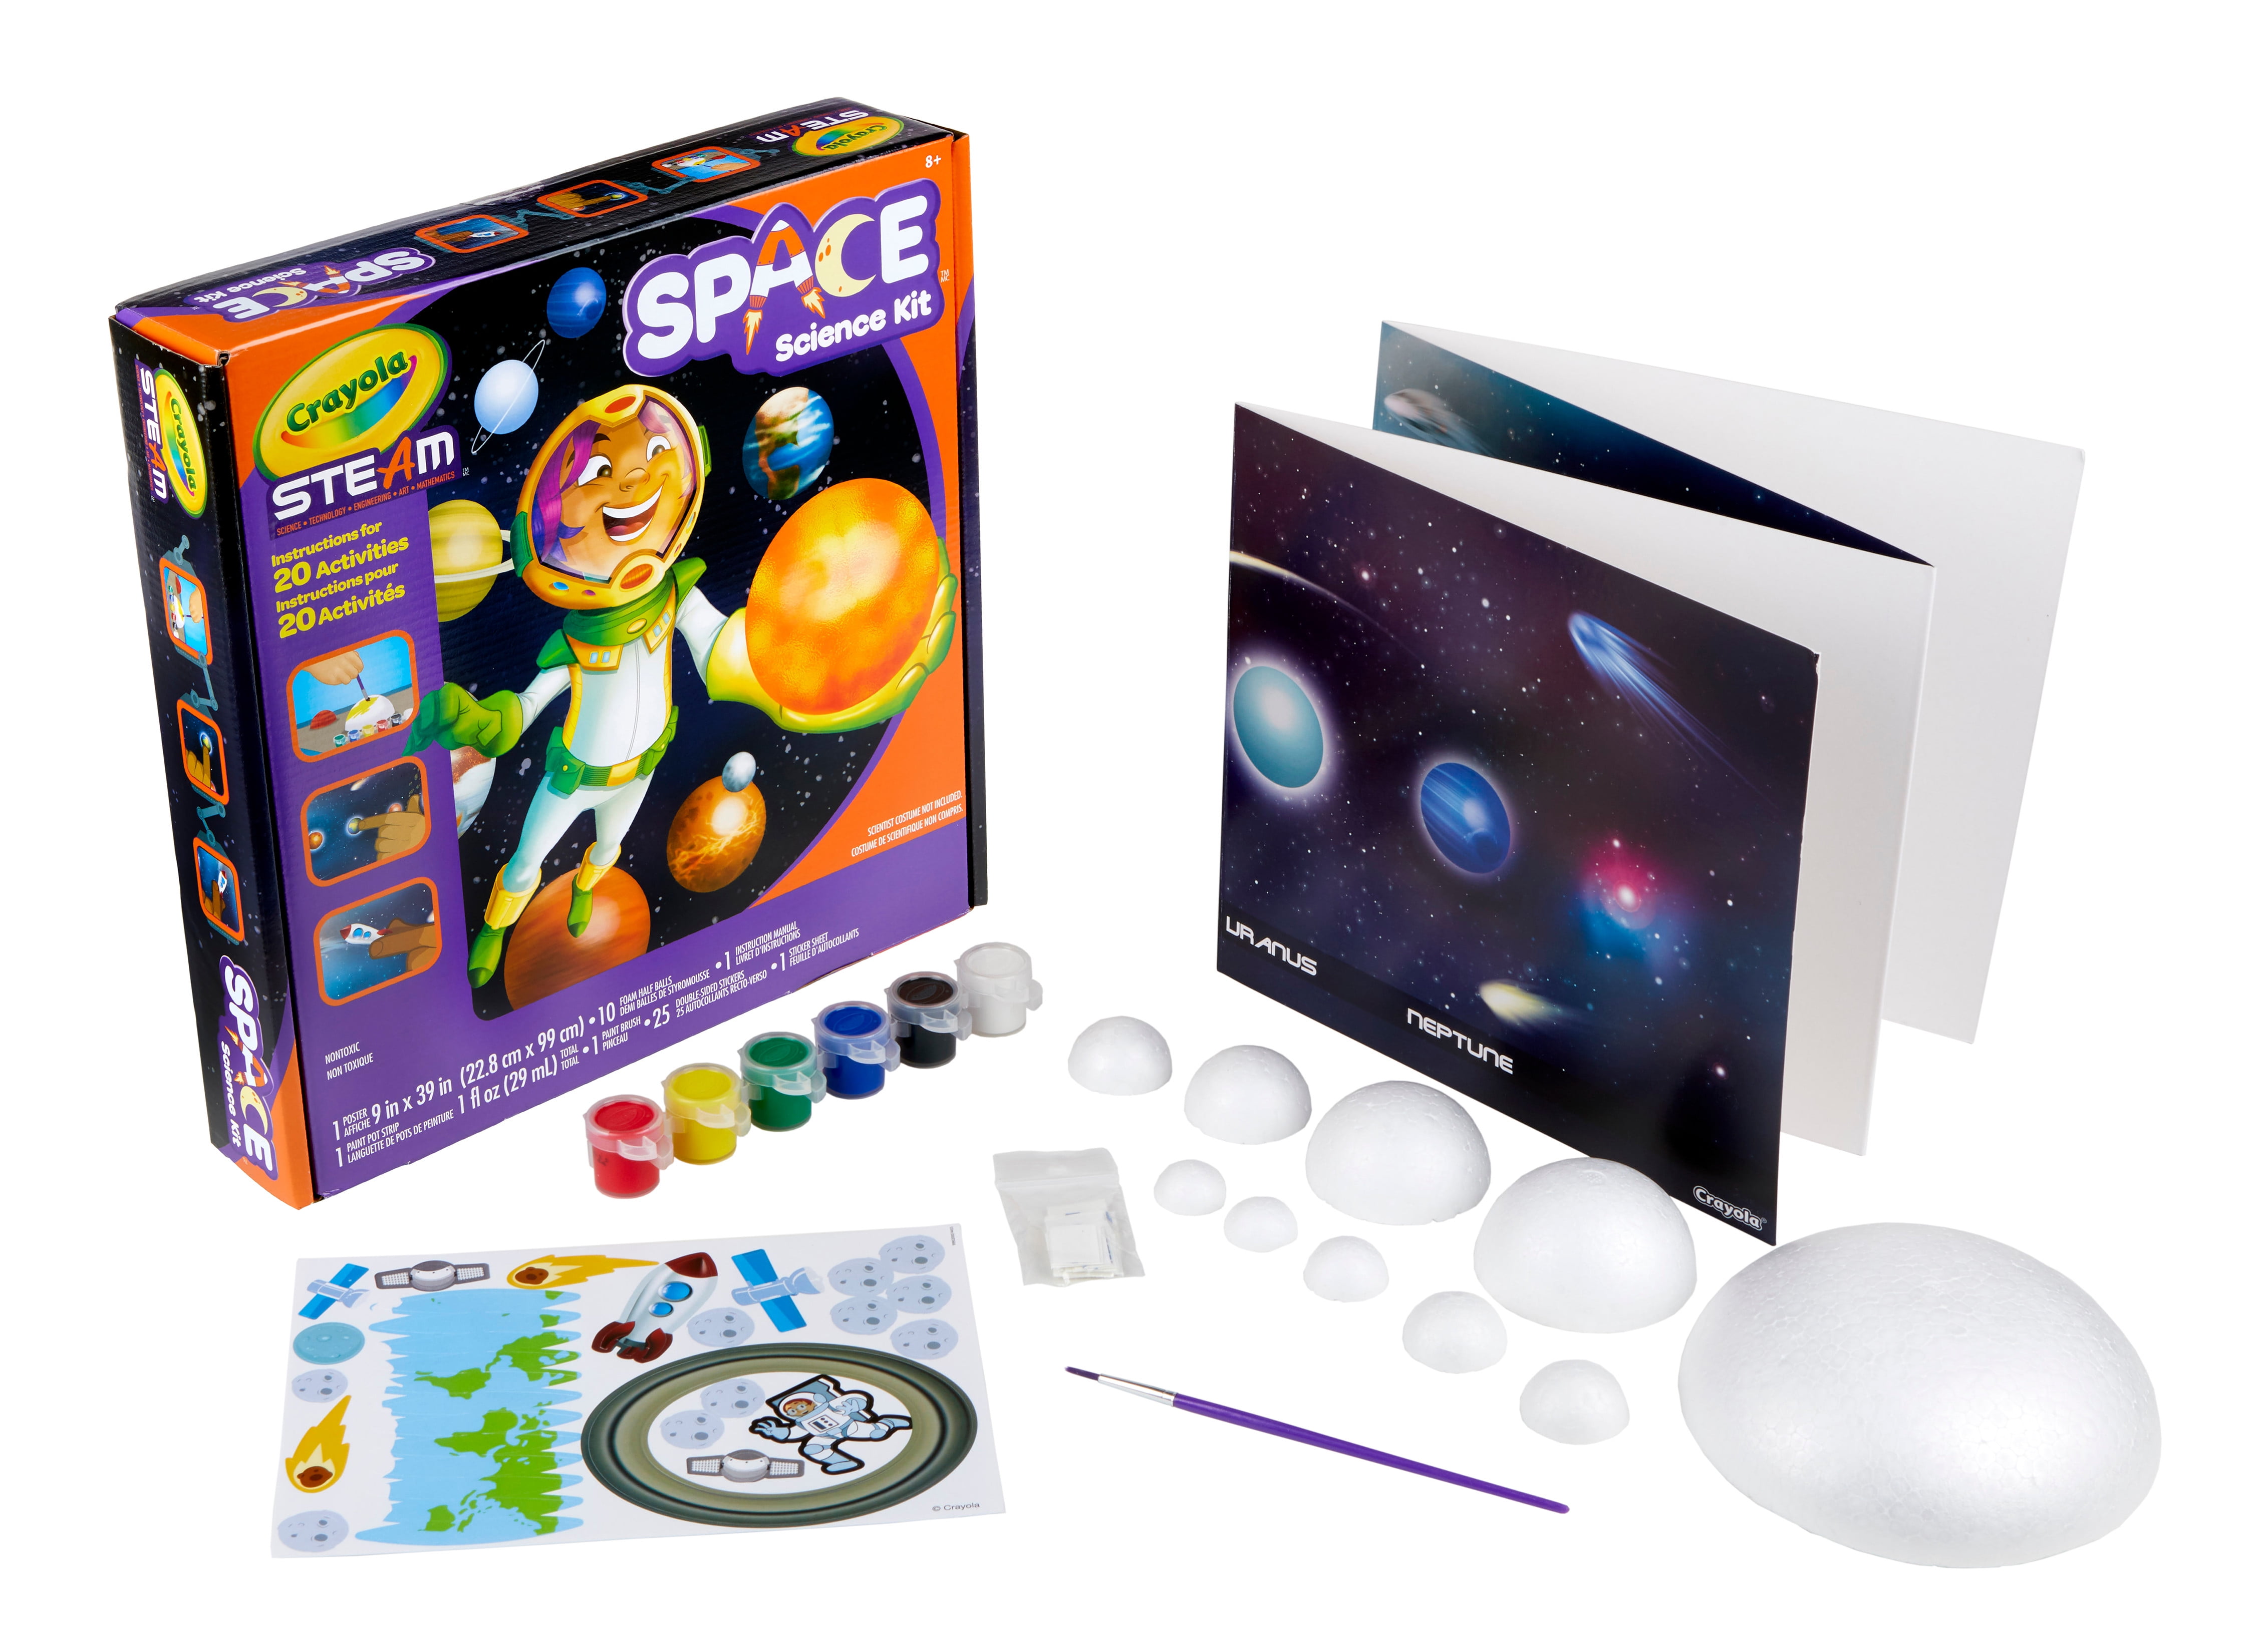 Crayola STEAM Liquid Science Kit - Best Arts & Crafts for Ages 8 to 12